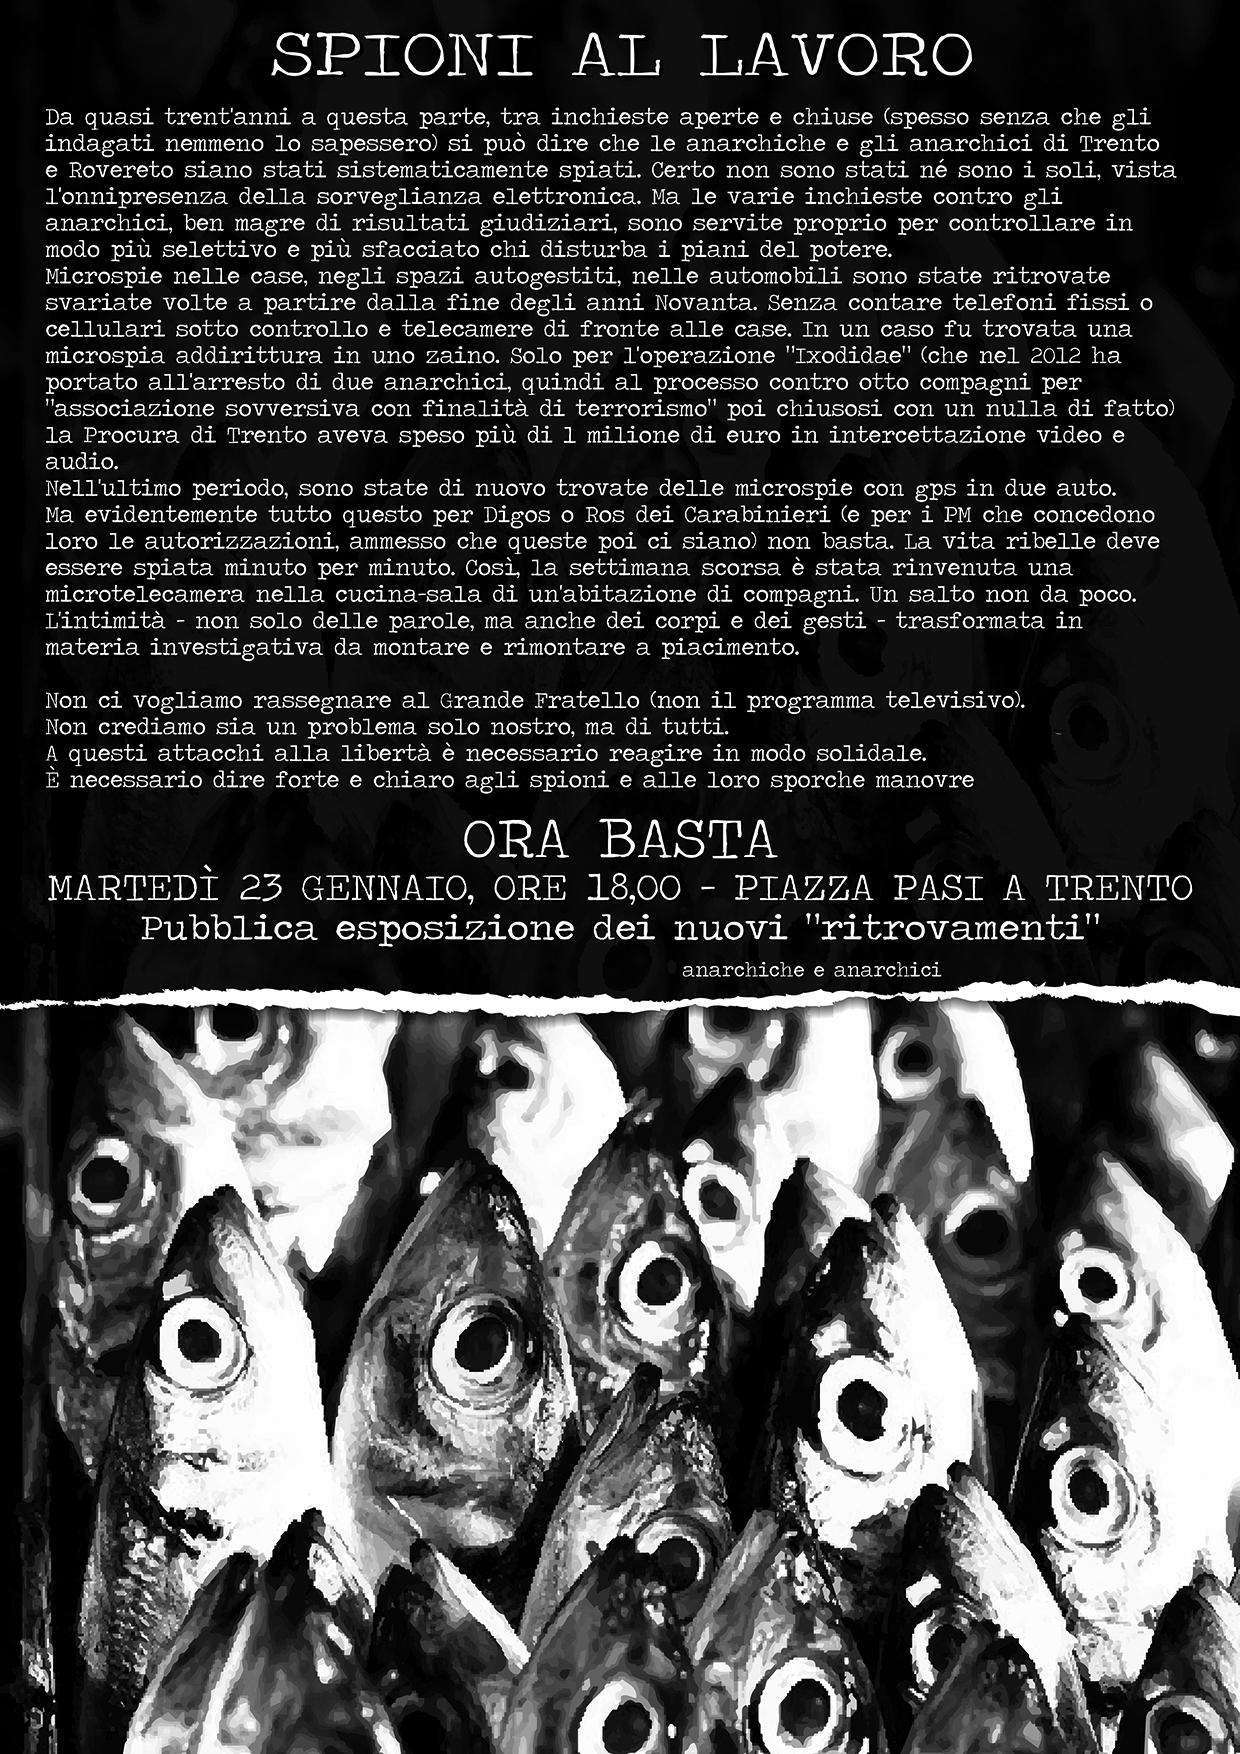 Trento, Italy: “Spies at work” Poster of 23rd January’s initiative concerning the bugs recently found in Trento